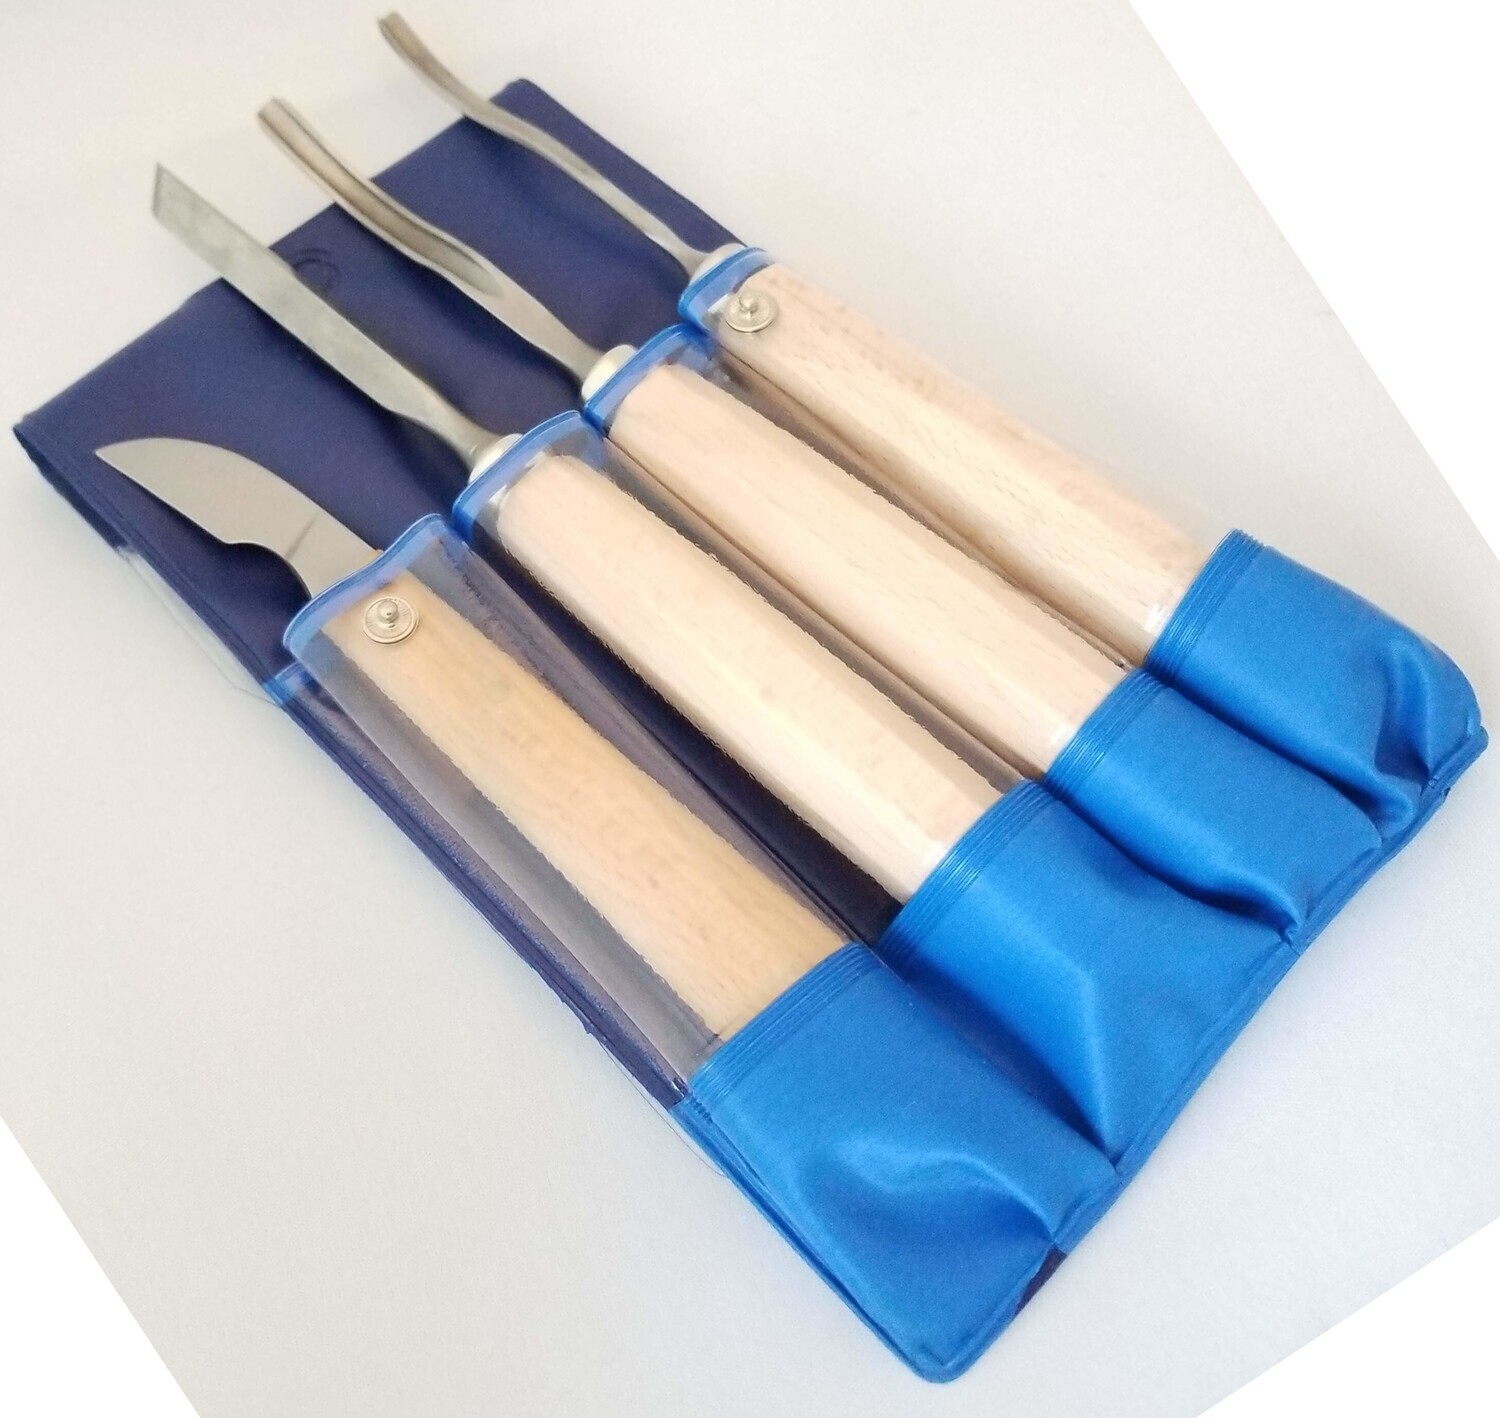 MHG Set of Wood Carving Chisels and knife in plastic pouch—contains: 1400.52, 1583.04, 1574.08, 1581.03